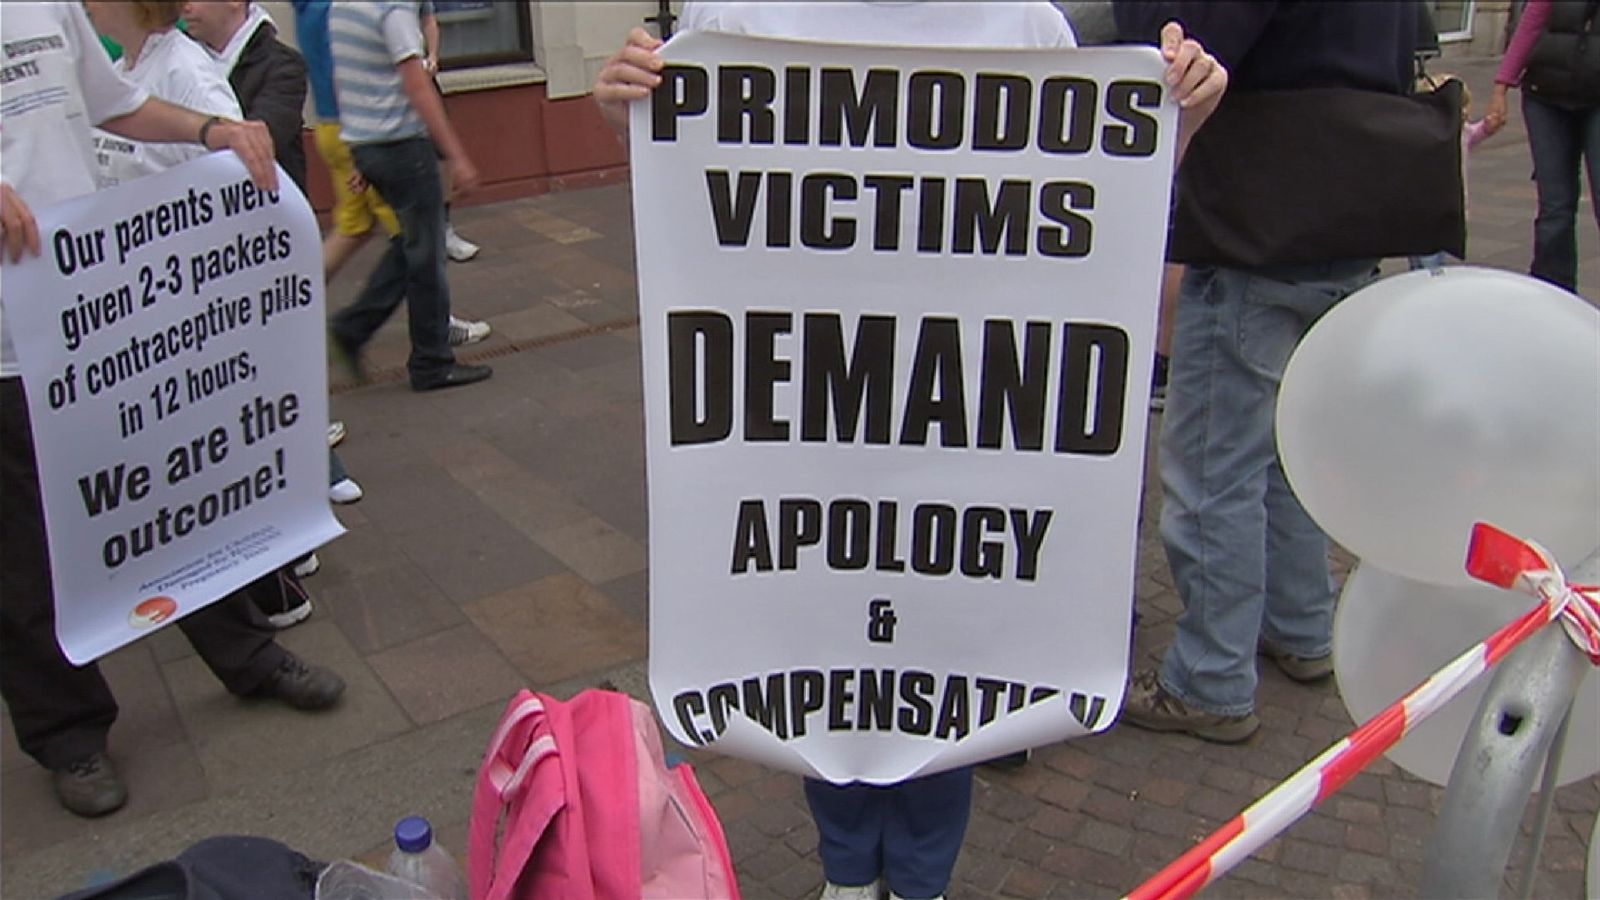 Primodos campaigners accuse government of 'bullying and intimidation' over legal demand